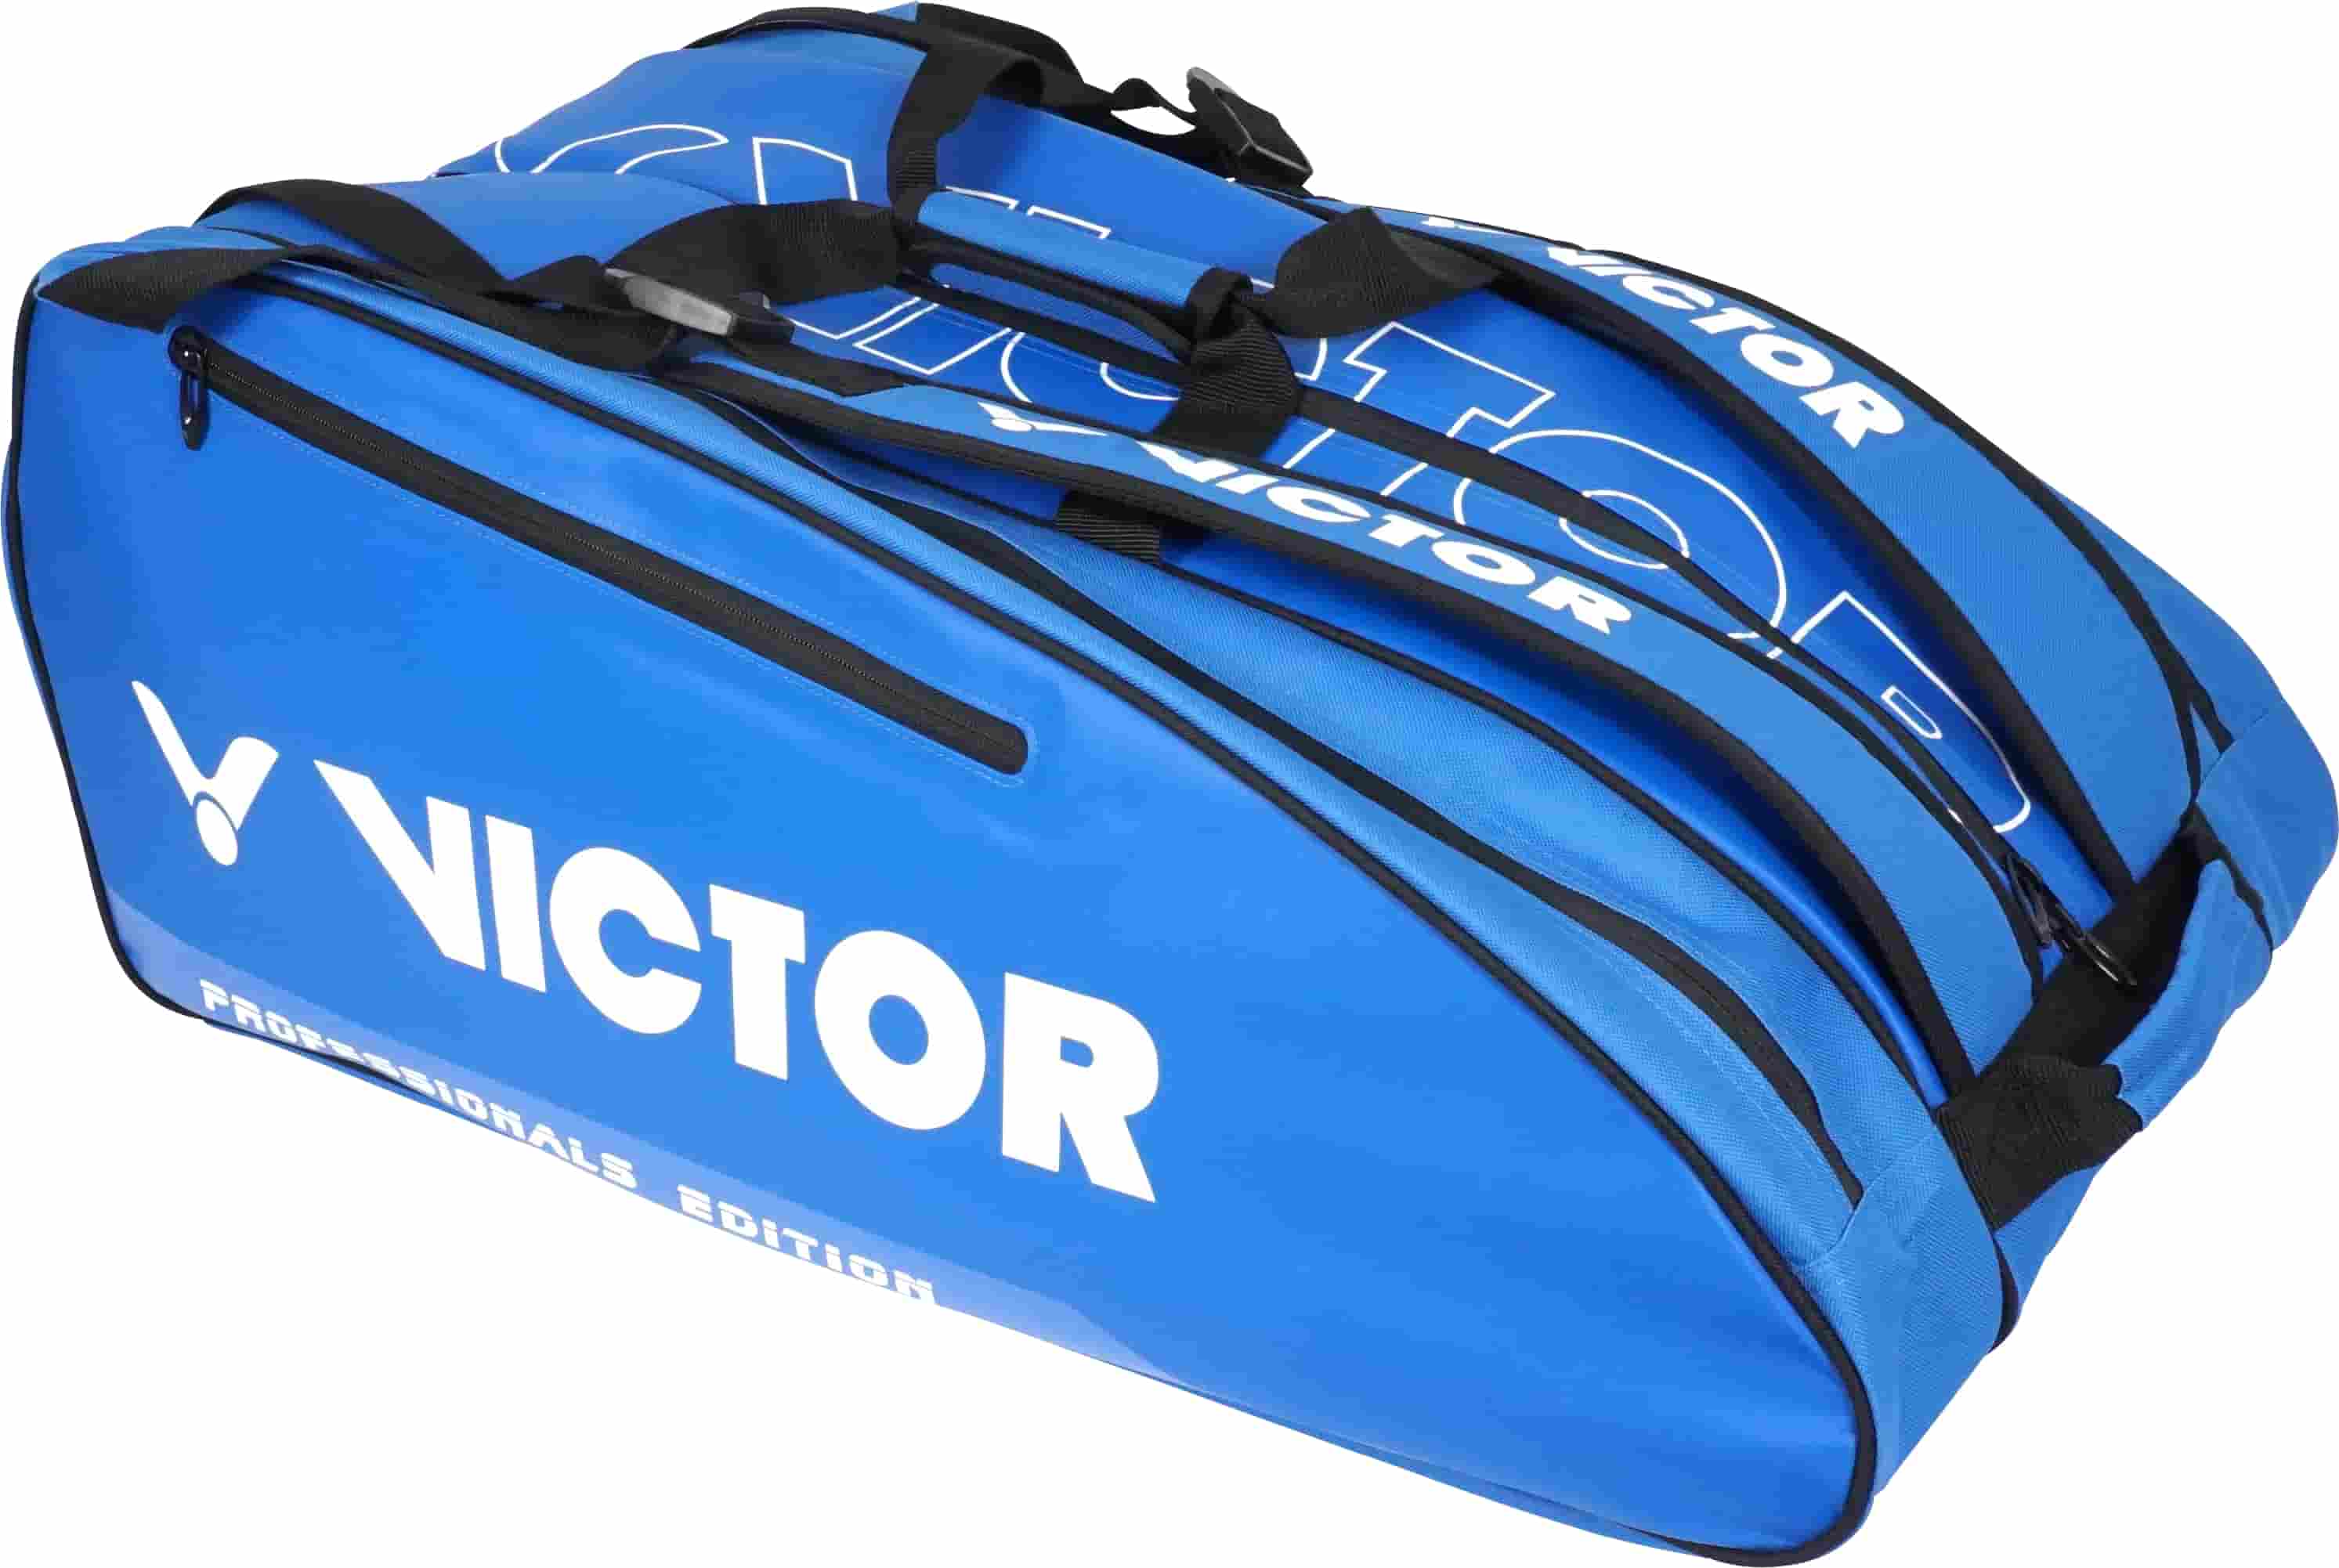 VICTOR Multithermobag 9031 C